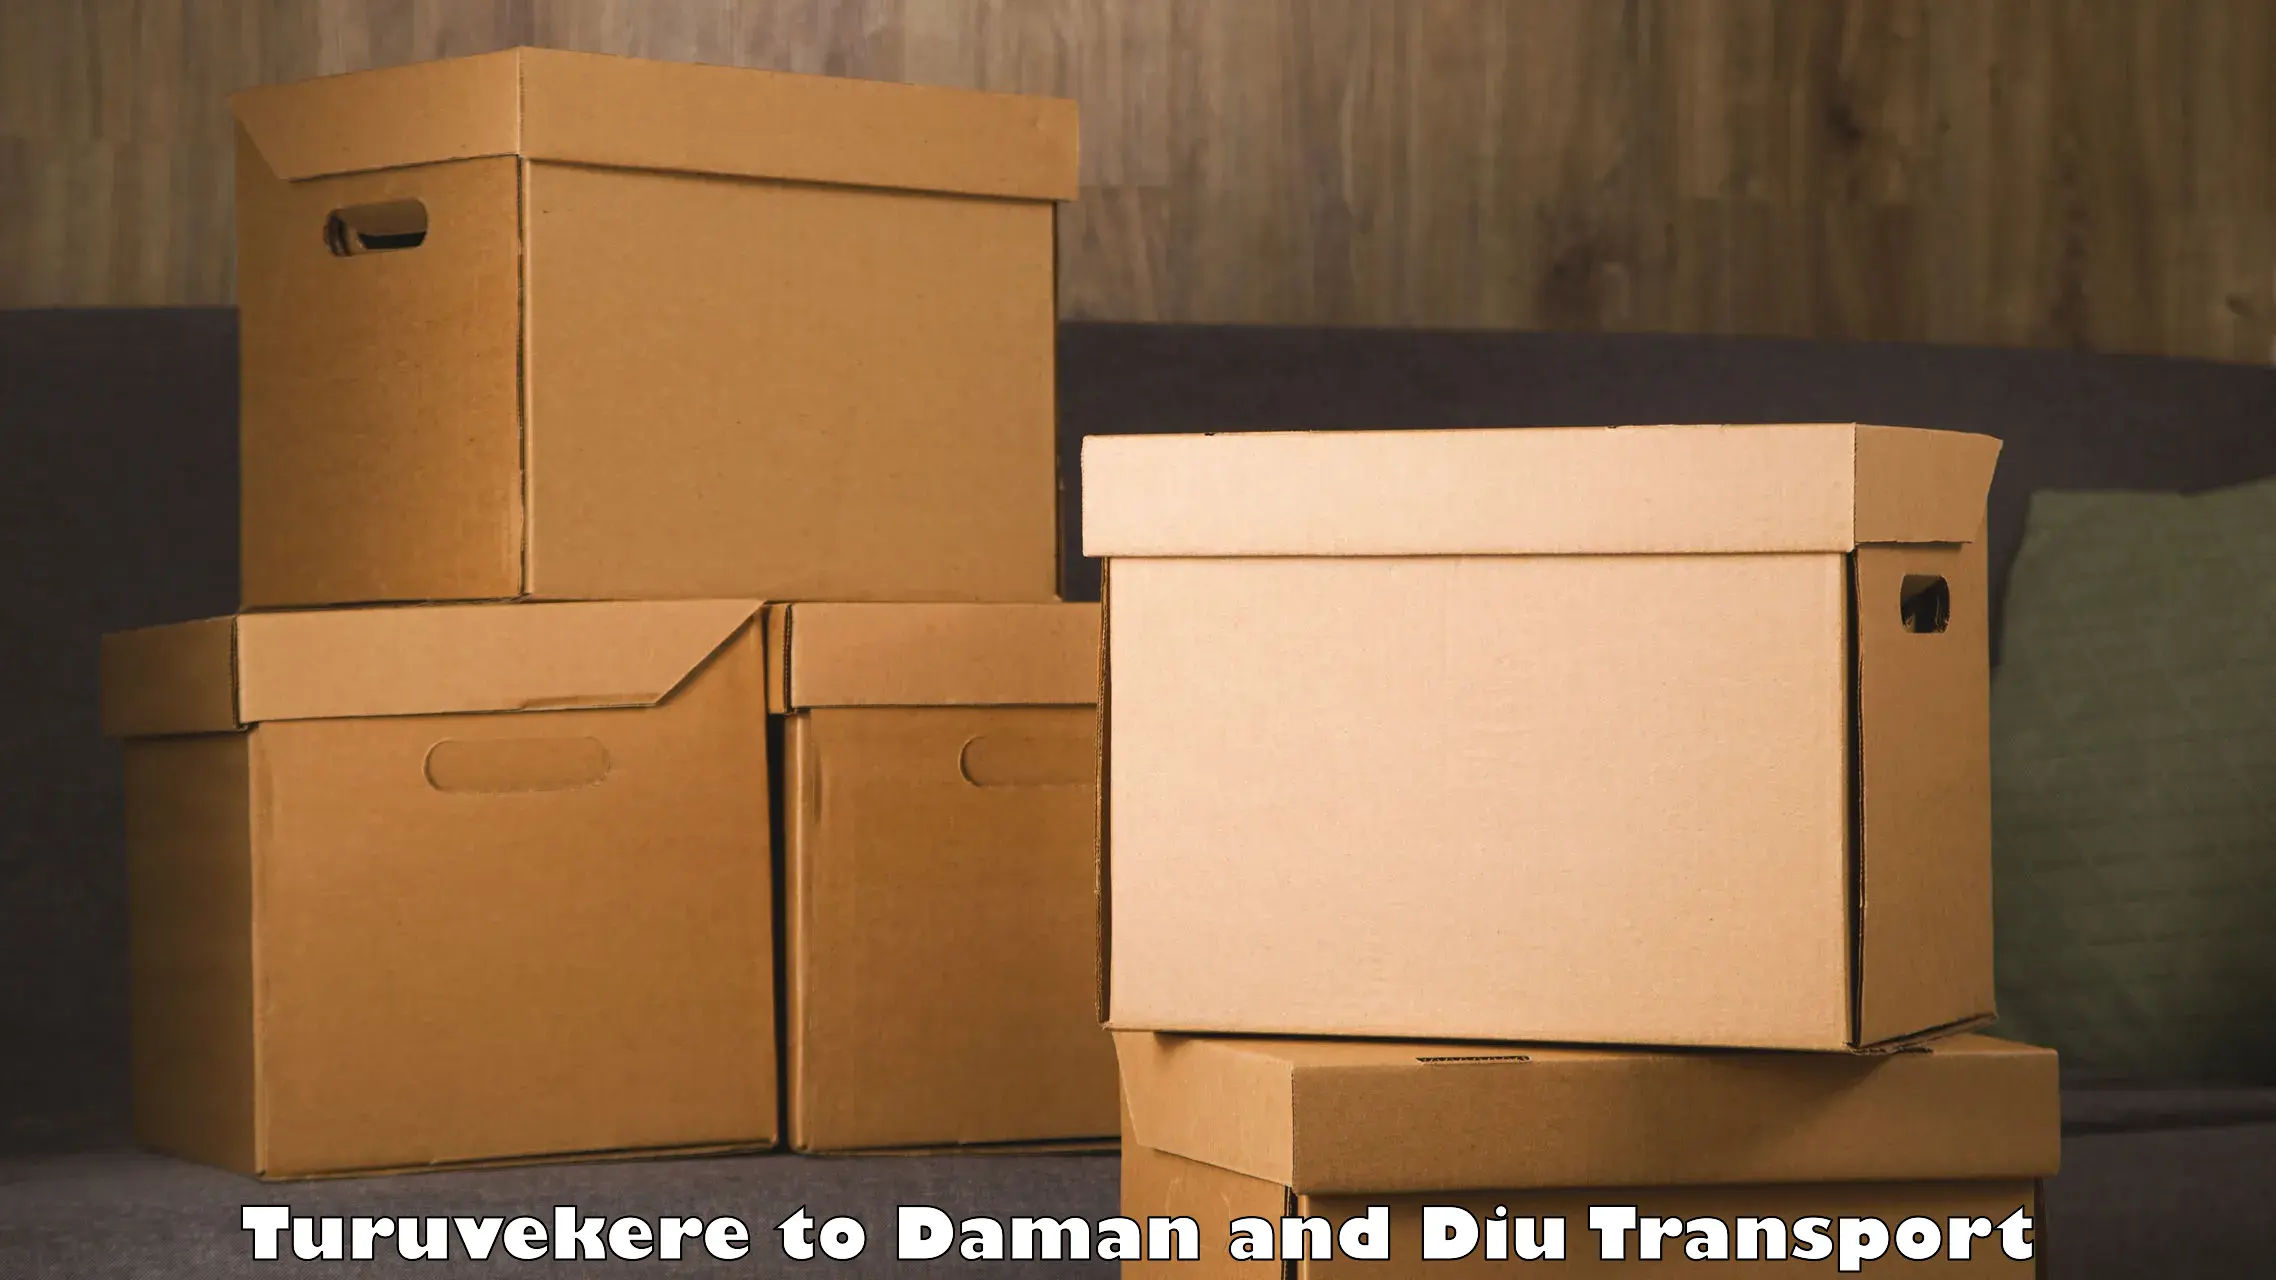 Two wheeler parcel service in Turuvekere to Daman and Diu